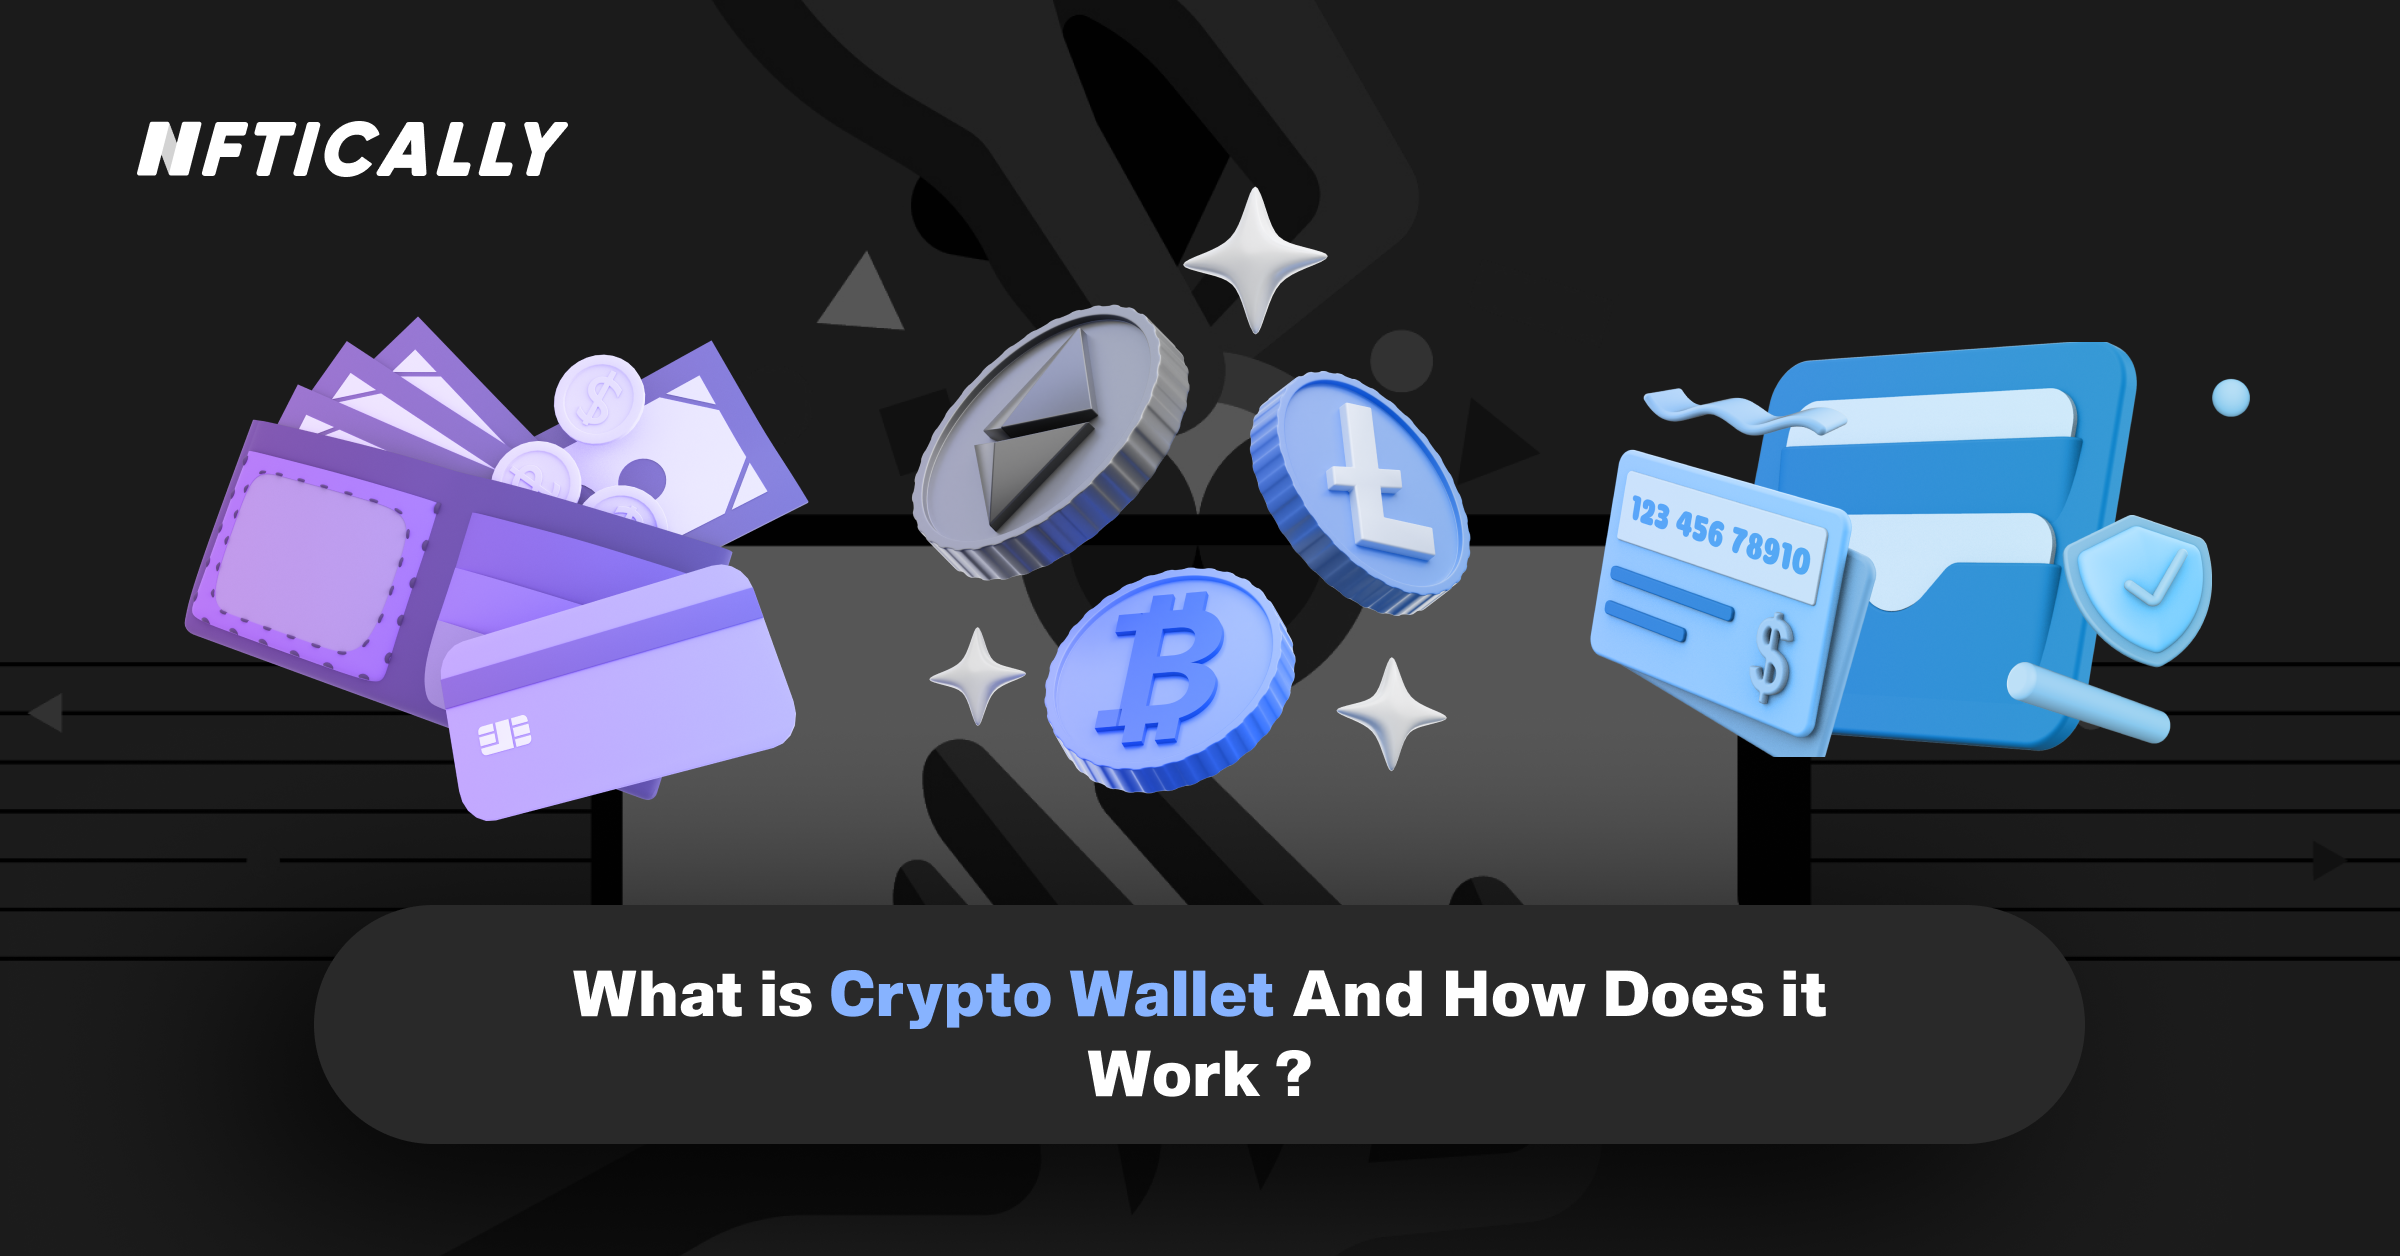 What is Crypto Wallet And How Does it Work?